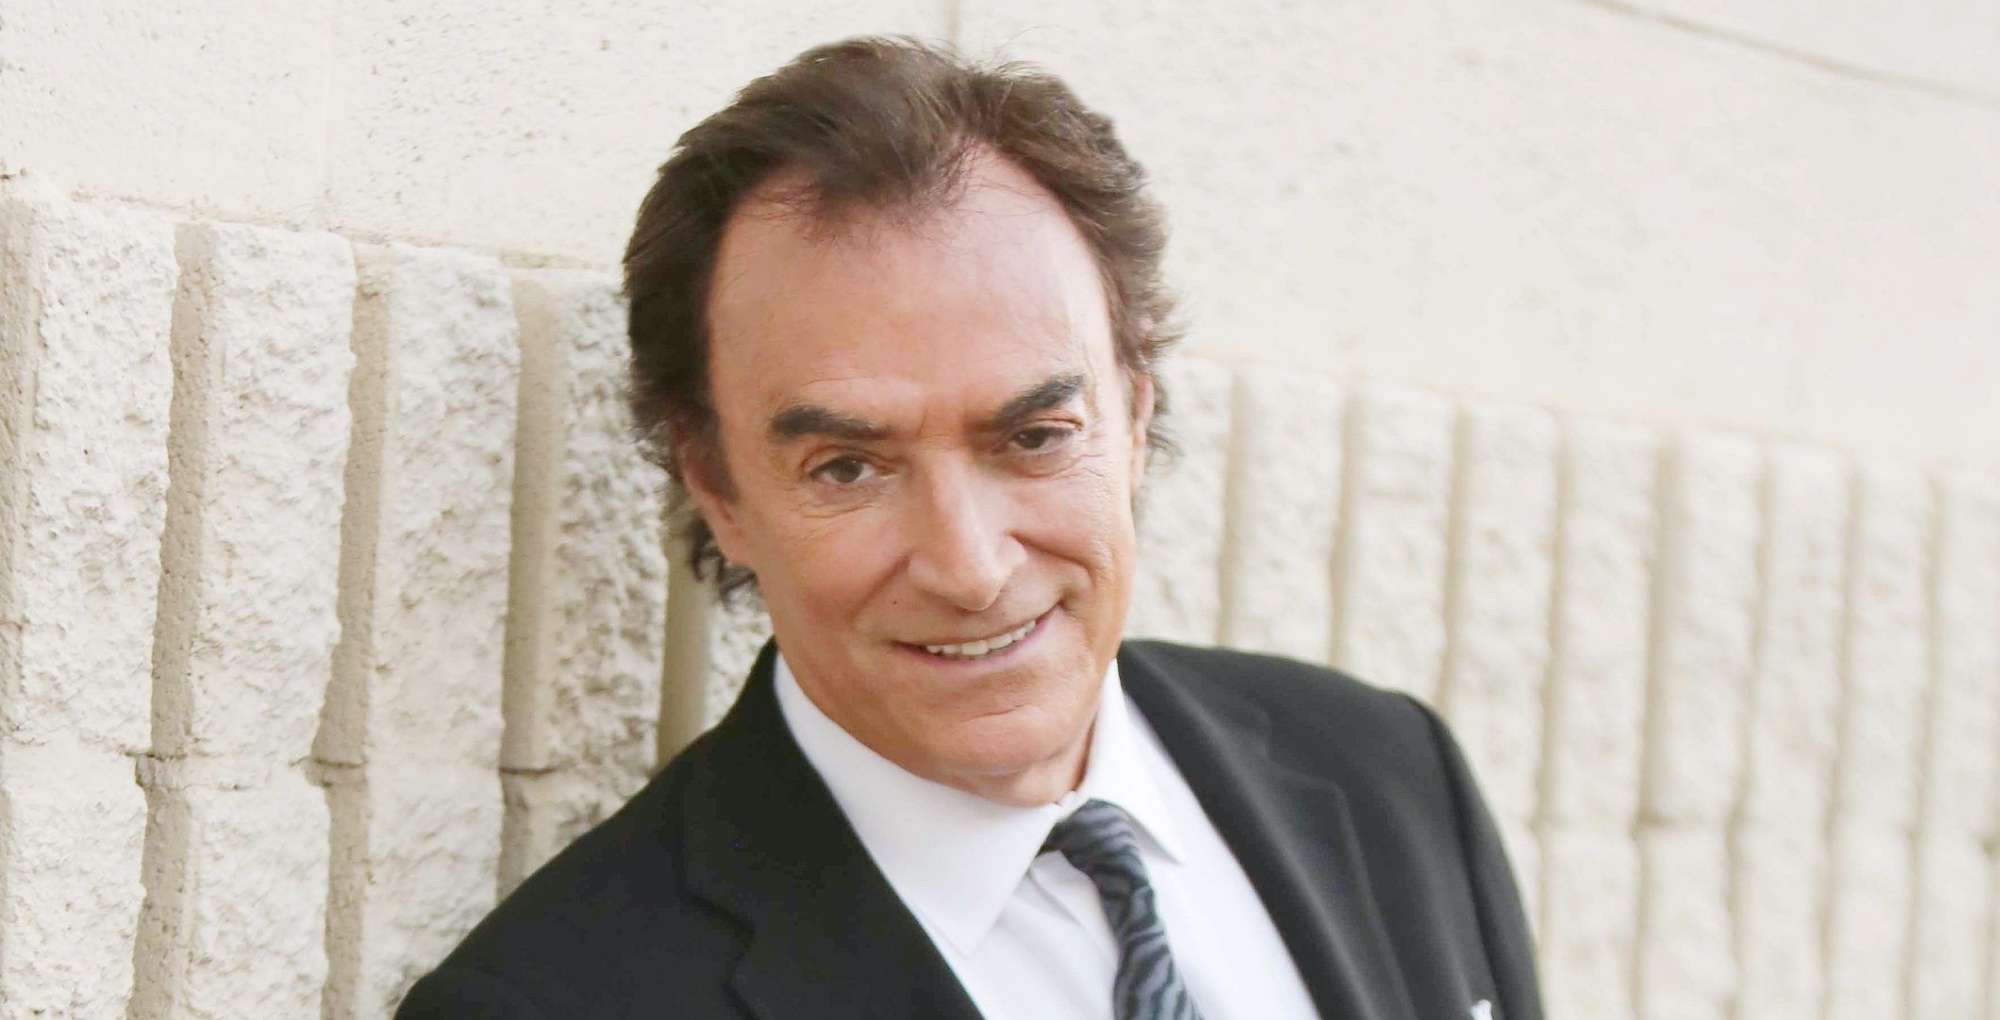 thaao penghlis days of our lives